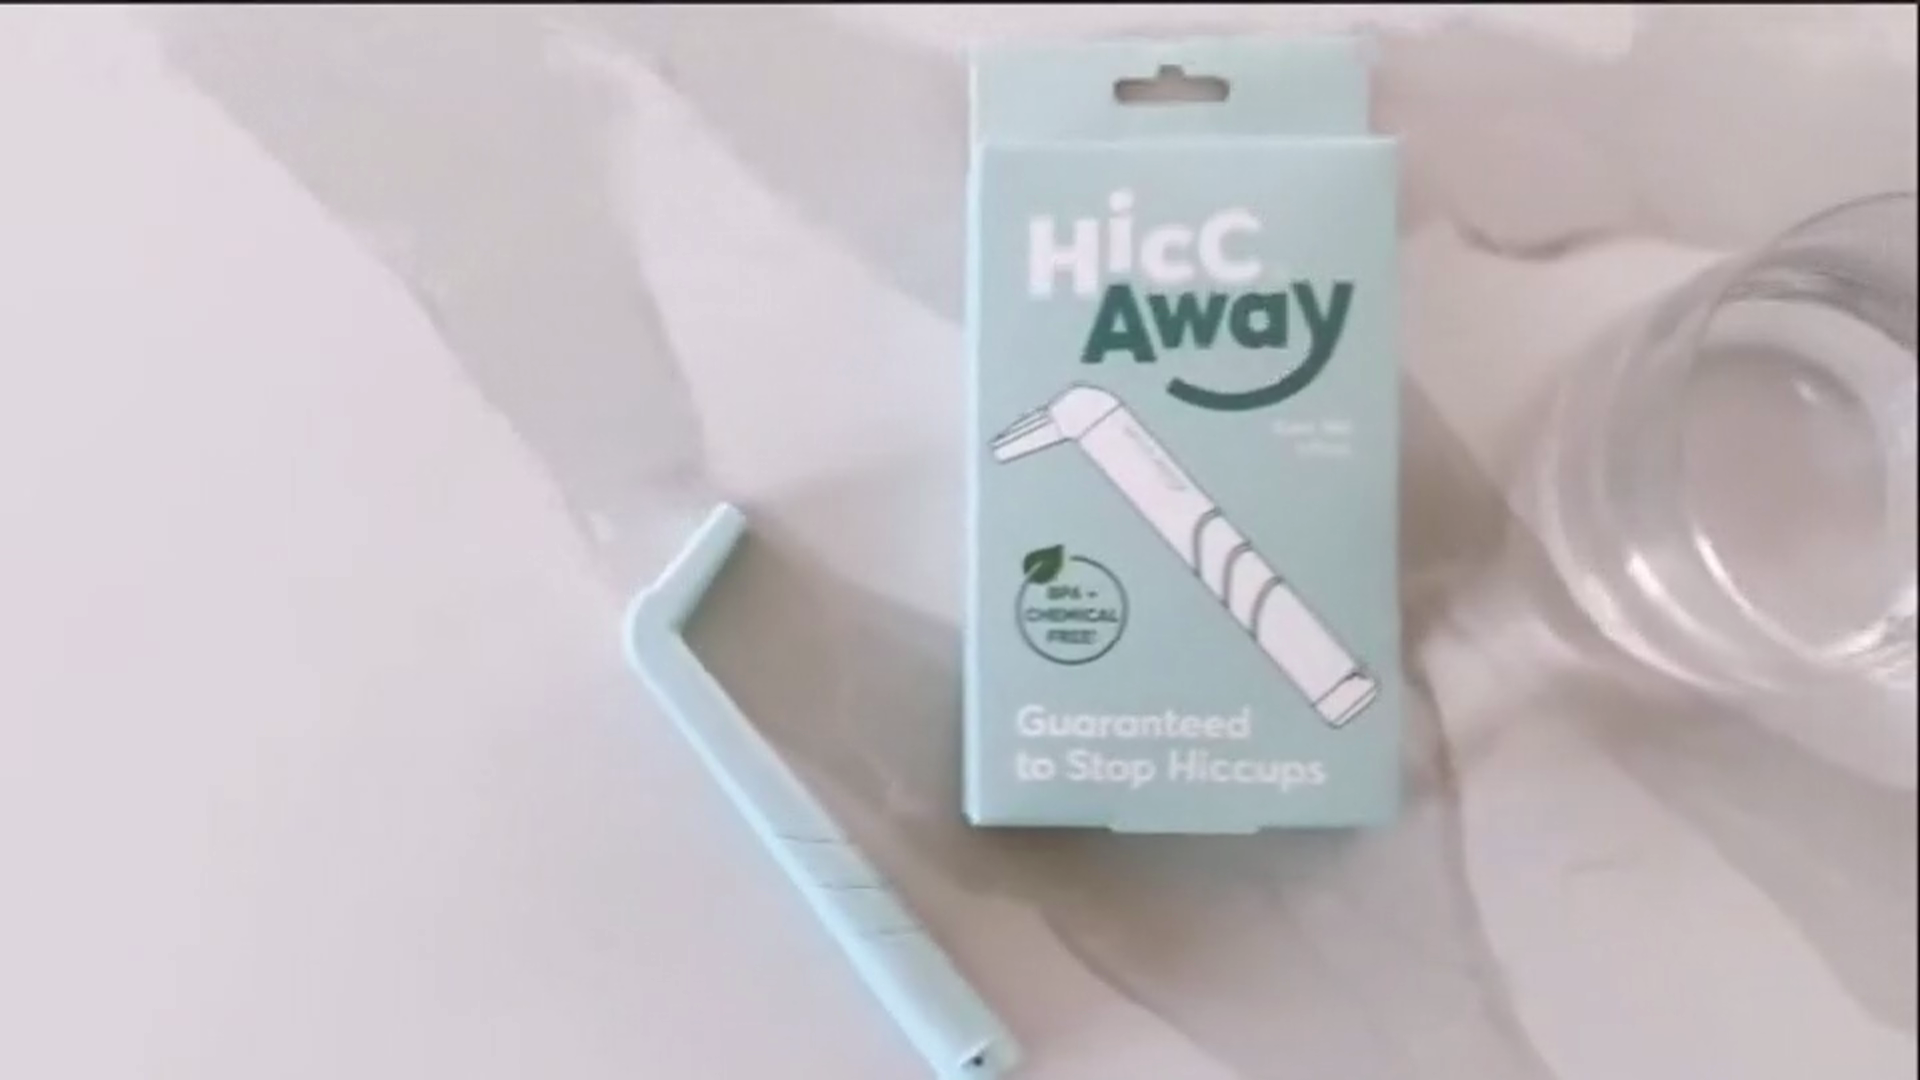 Hiccaway Hiccups Remedy Device